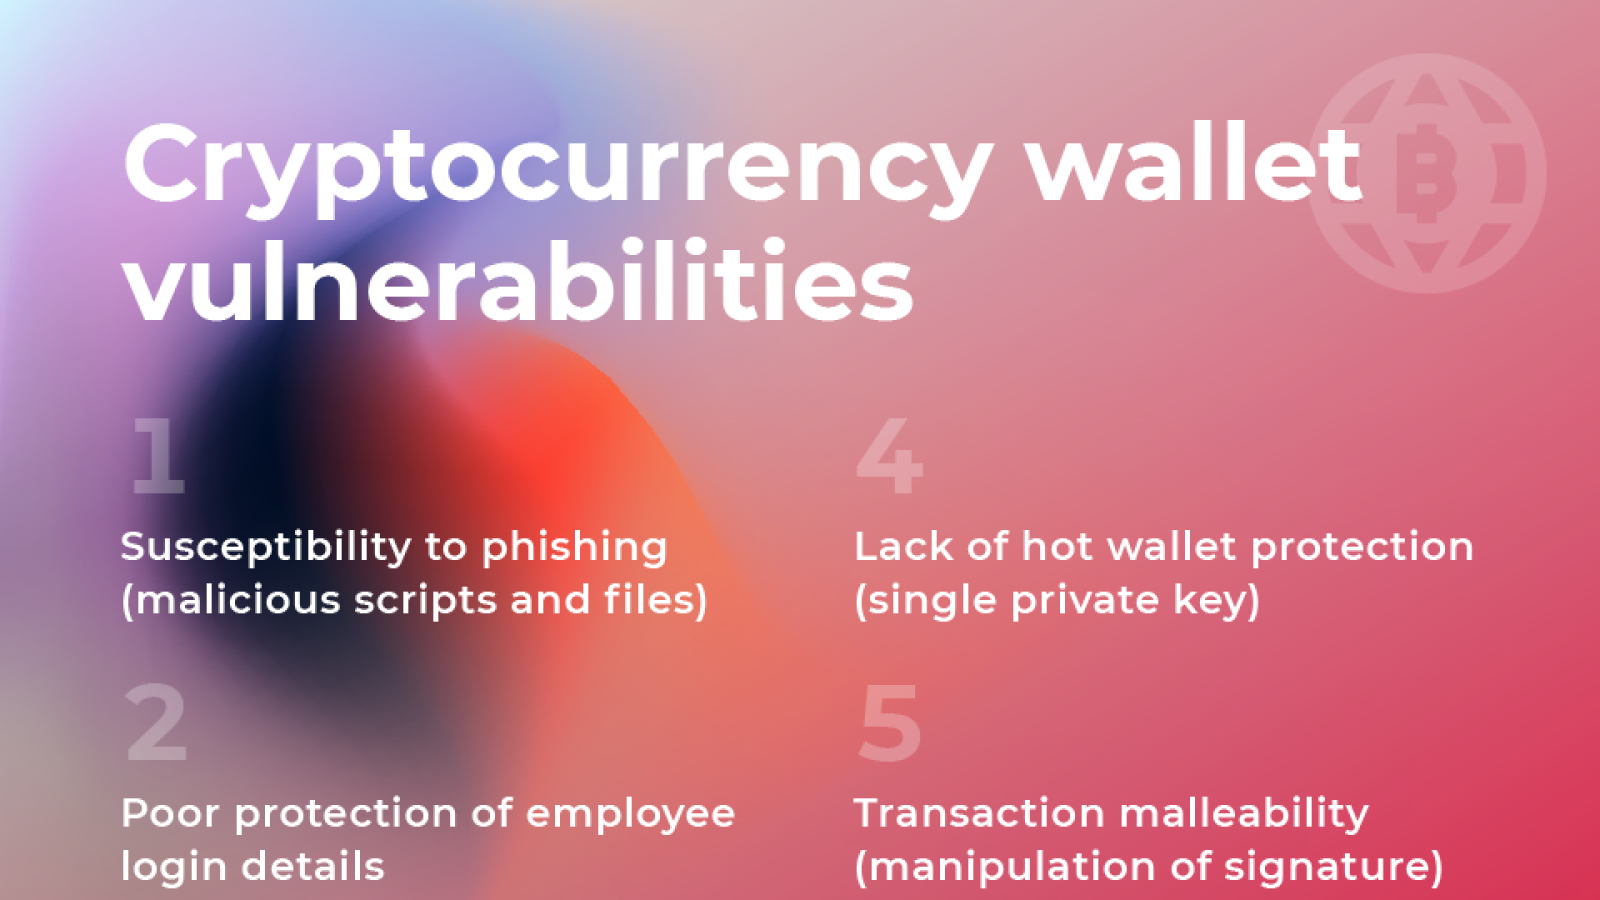 Main vulnerabilities of cryptocurrency wallets